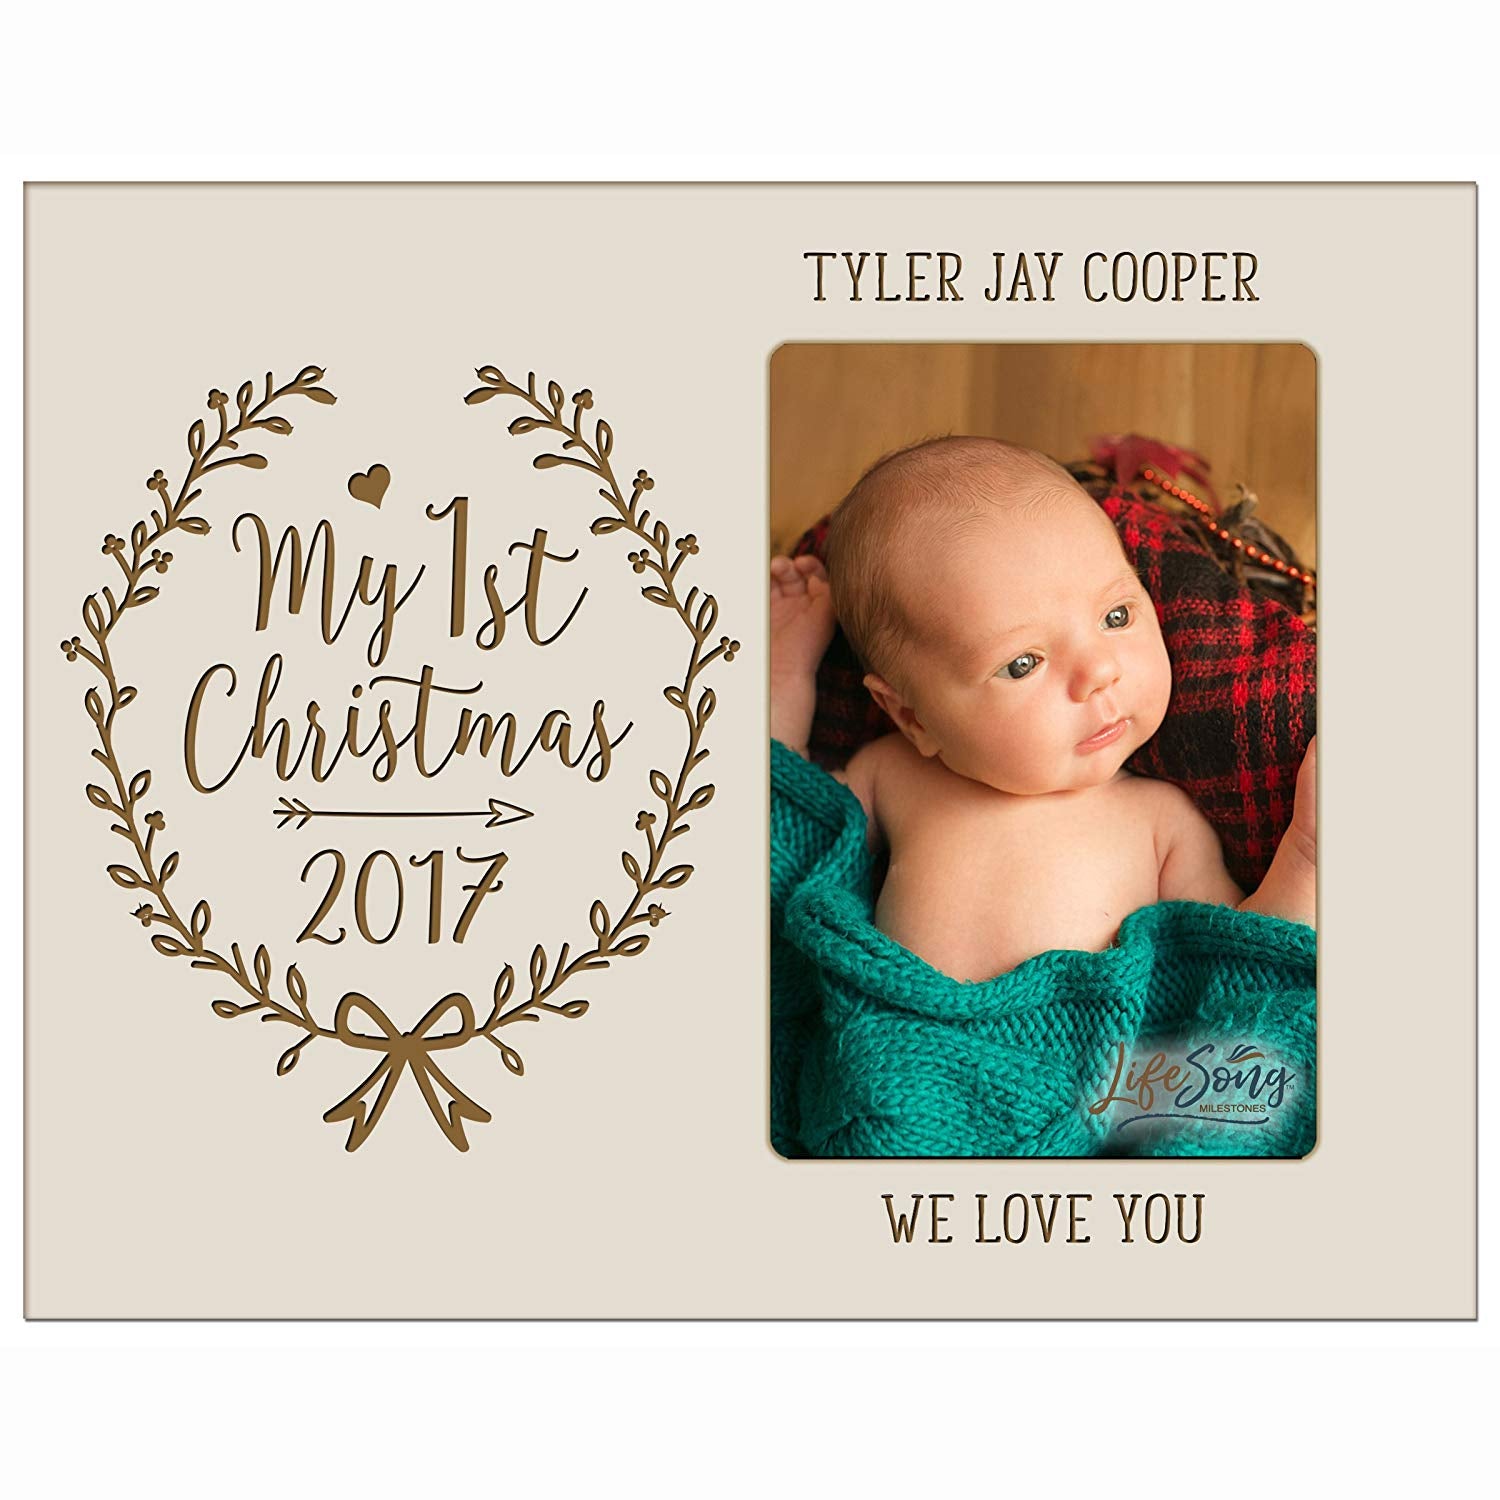 Personalized Home Christmas Arrow Design Photo Frame Holds 4x6 Photograph - LifeSong Milestones